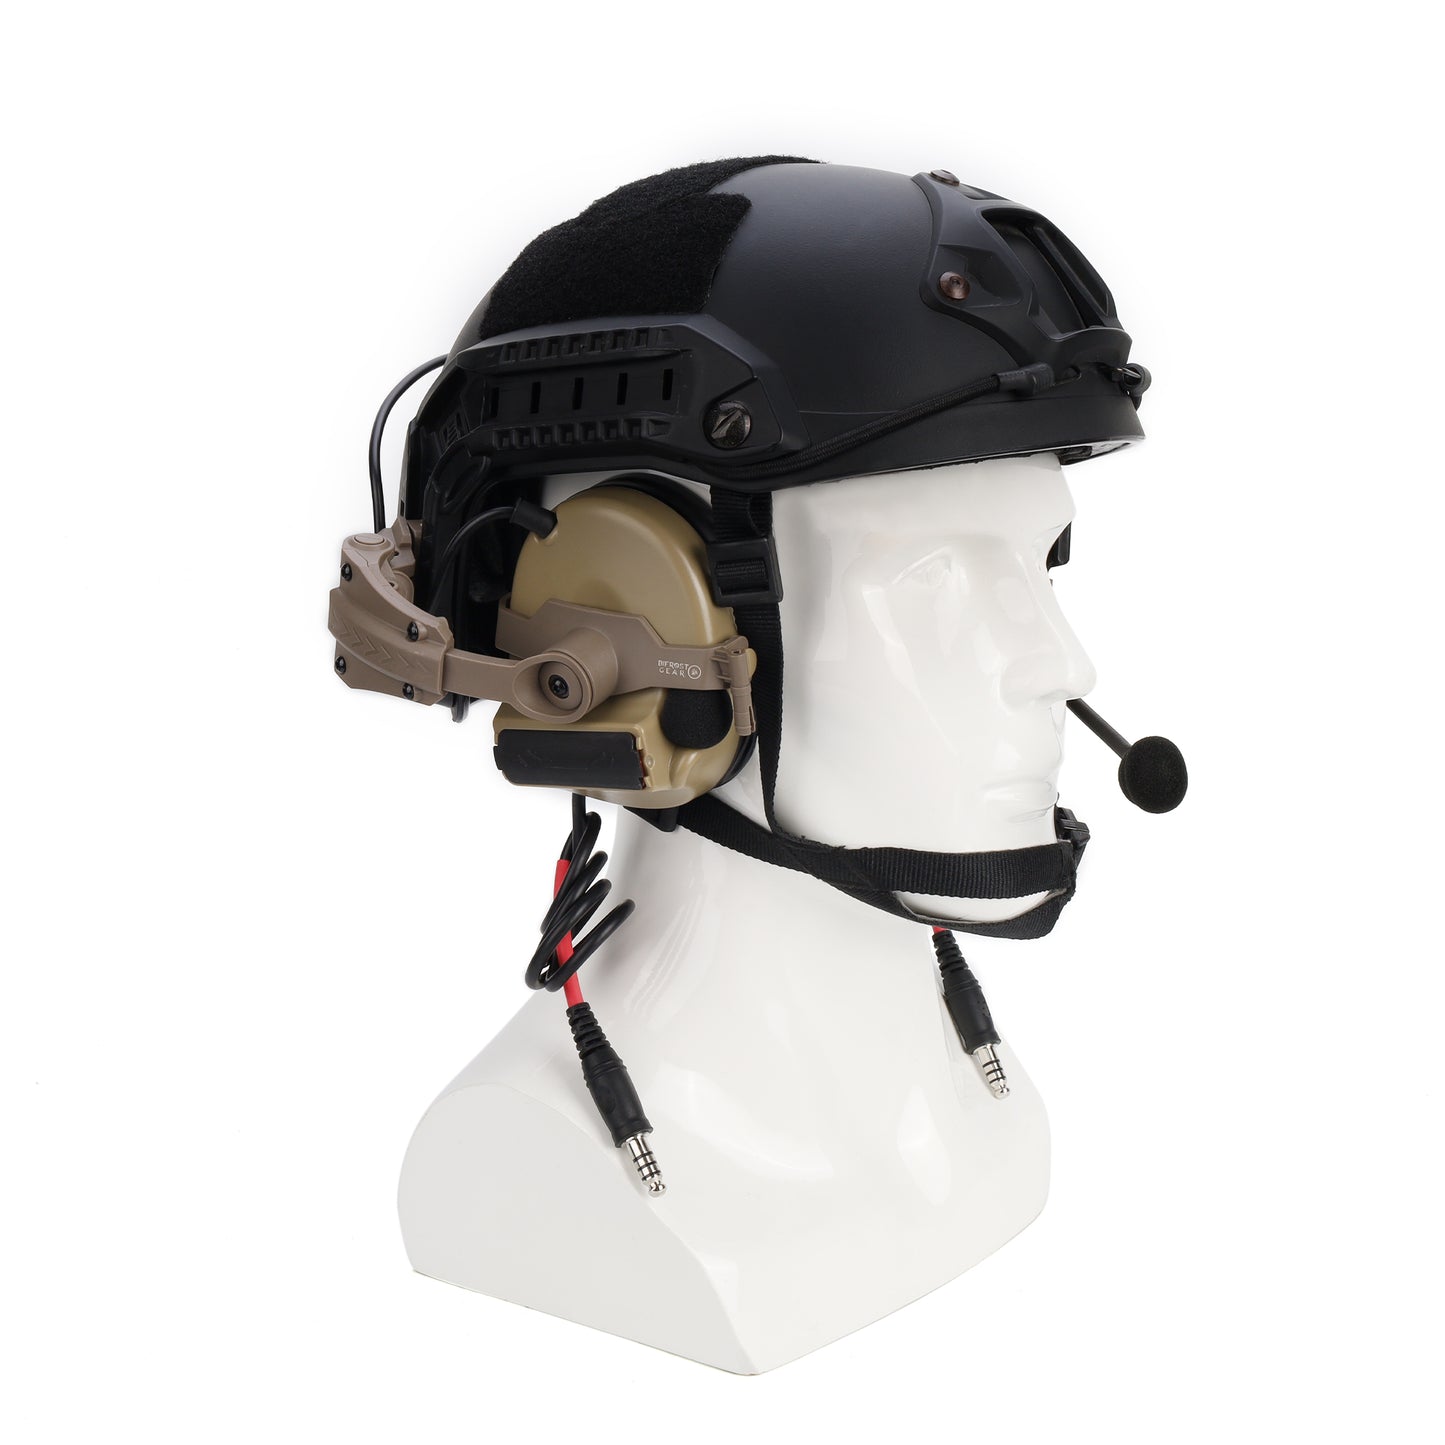 NRR 23db Dual Comm Electronic Hearing Protection Communications Headset with Helmet Rail Adapters